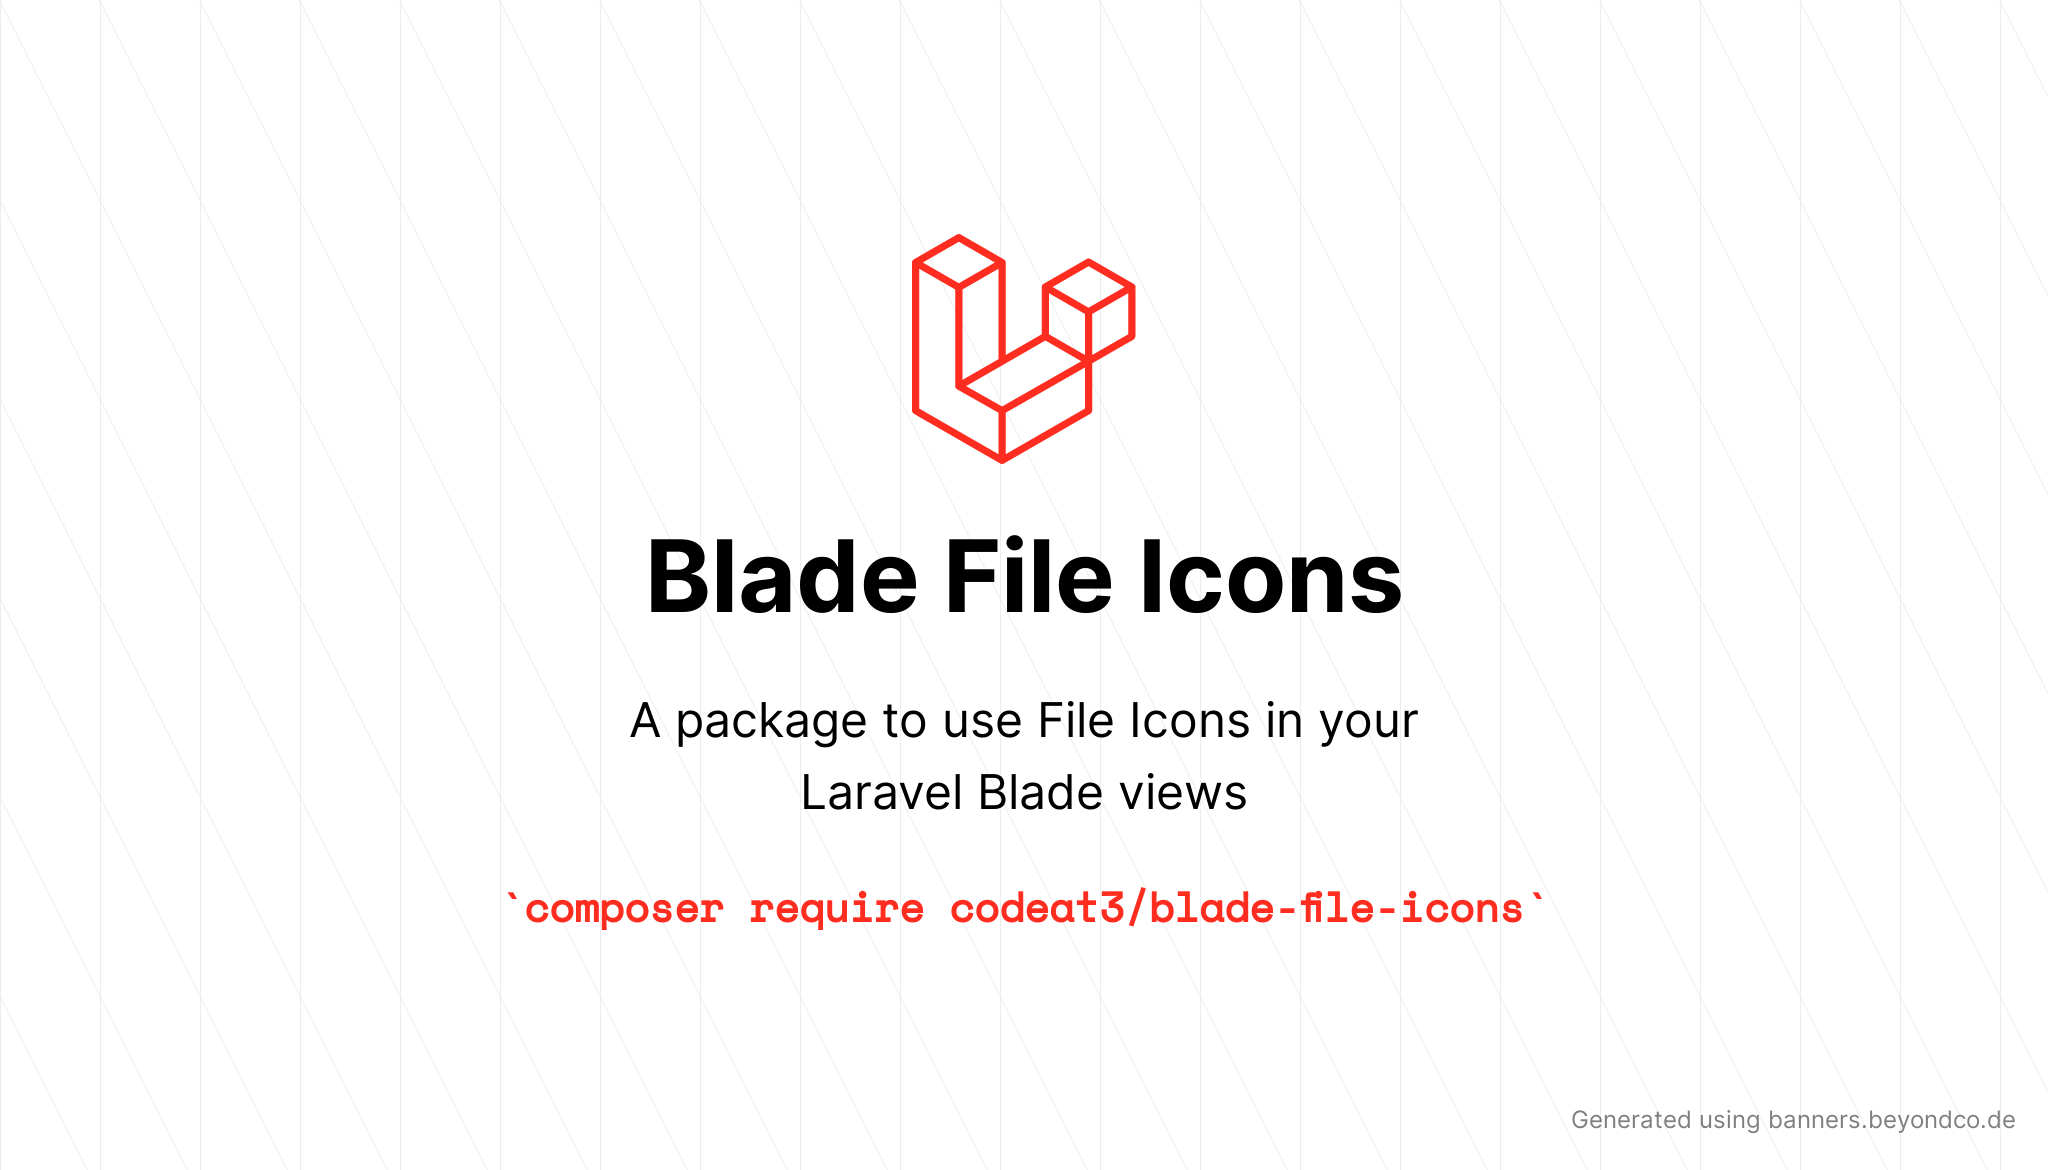 socialcard-blade-file-icons.png